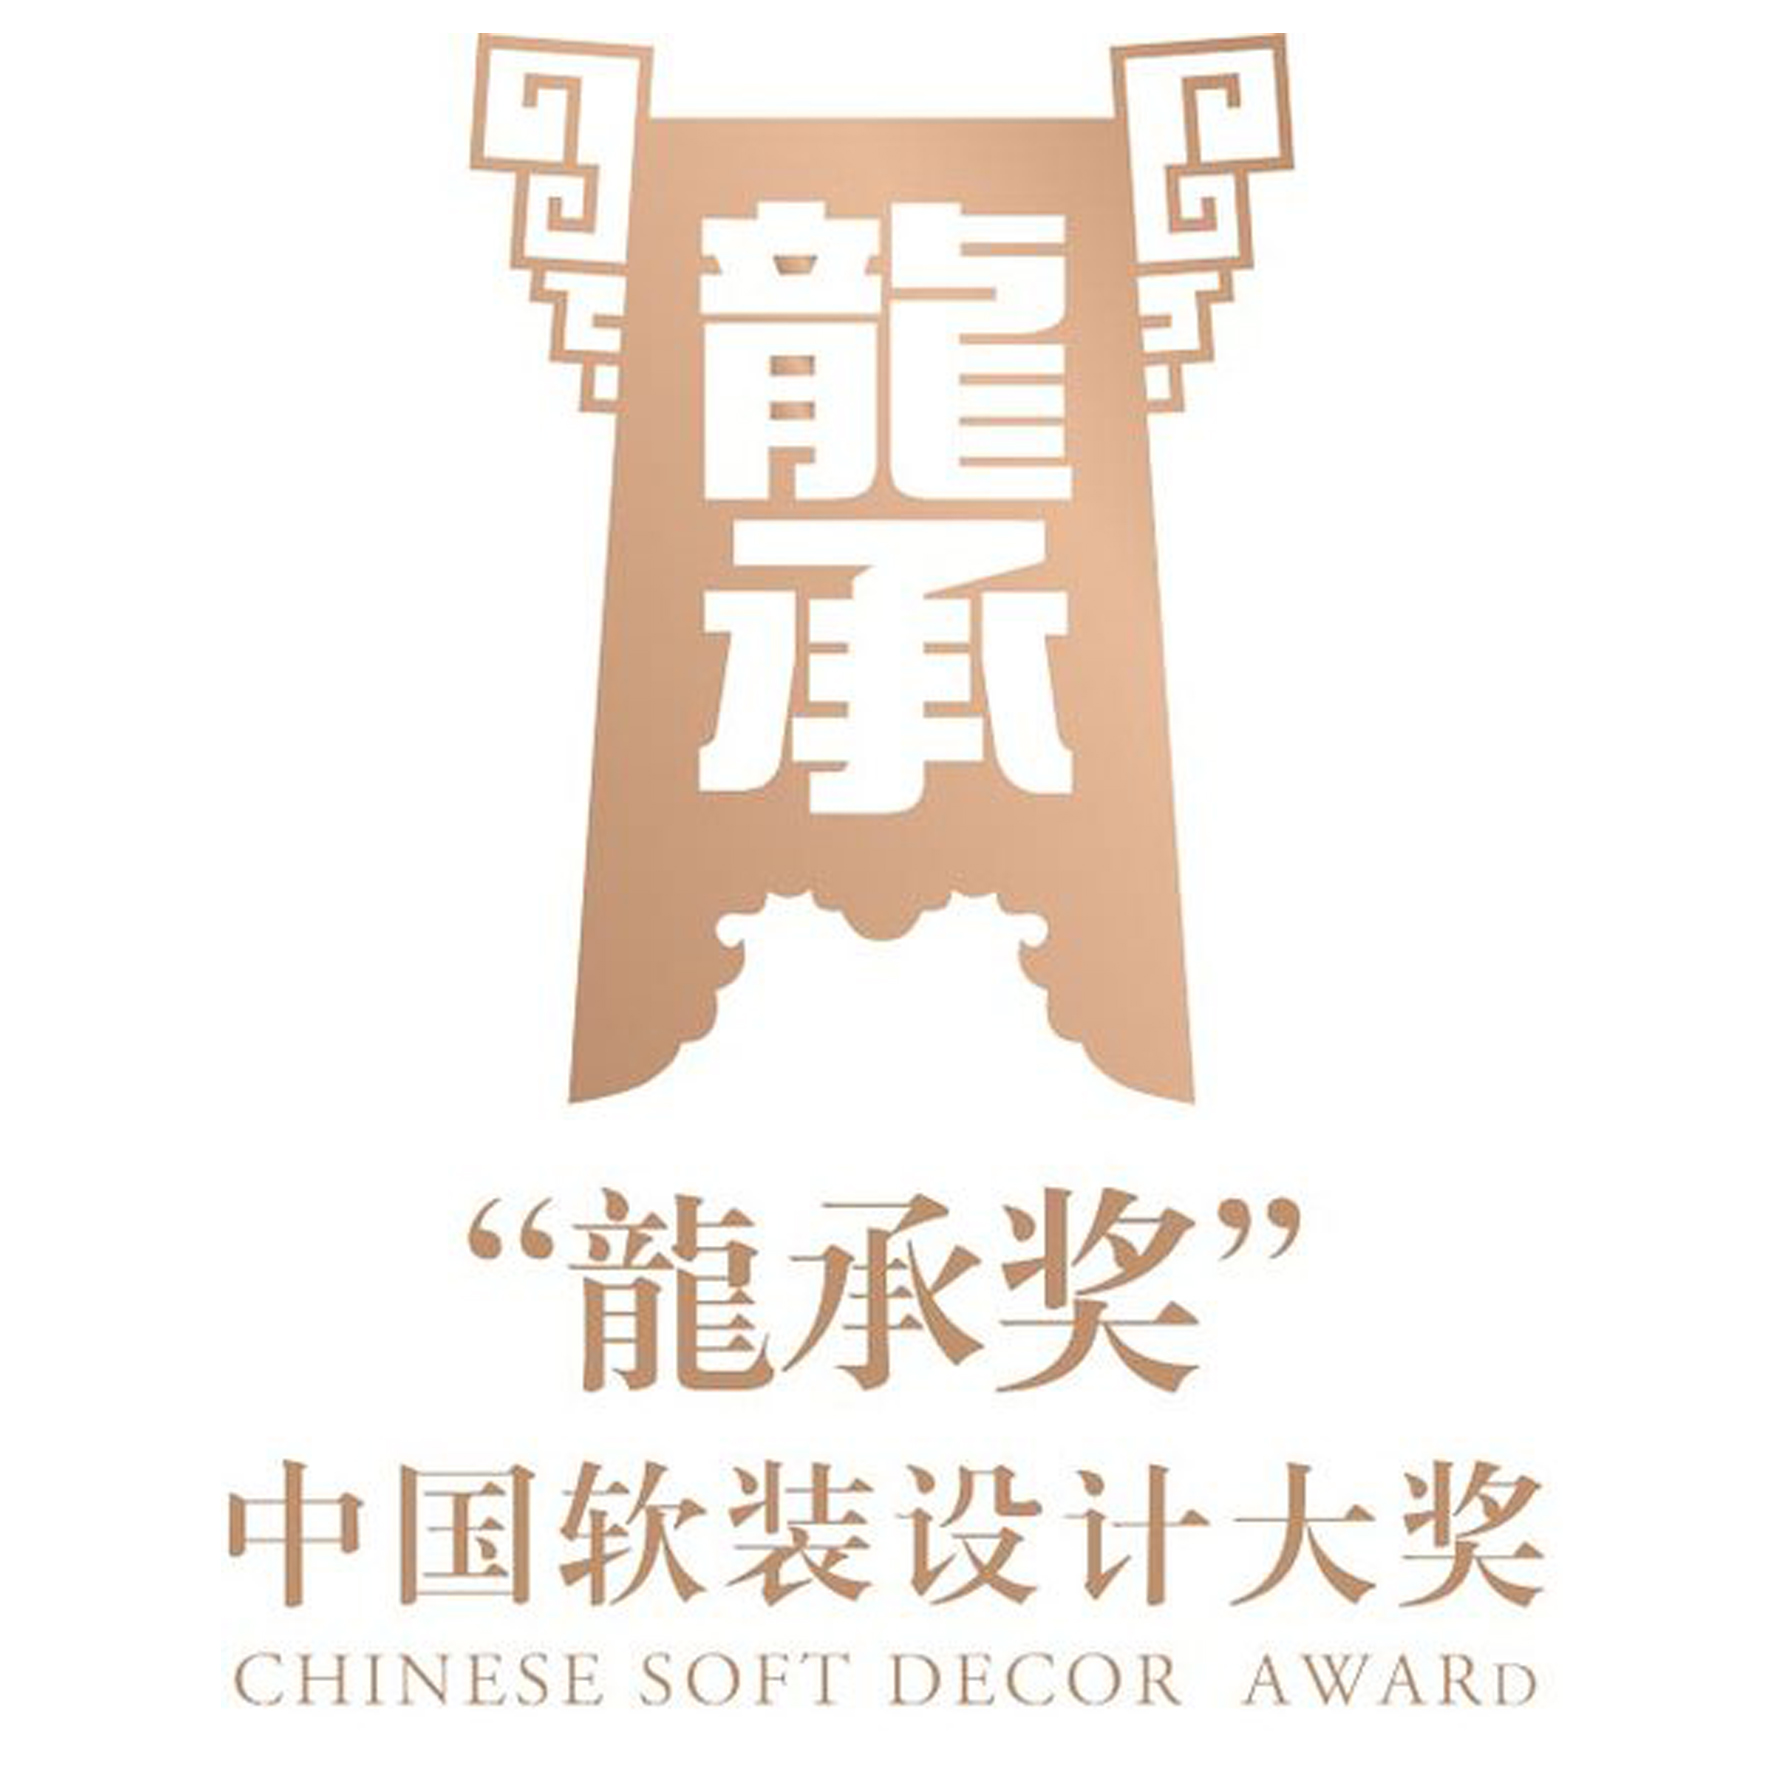 Chinese Soft Decor Award - 2018 Space Furnishings Excellence Award